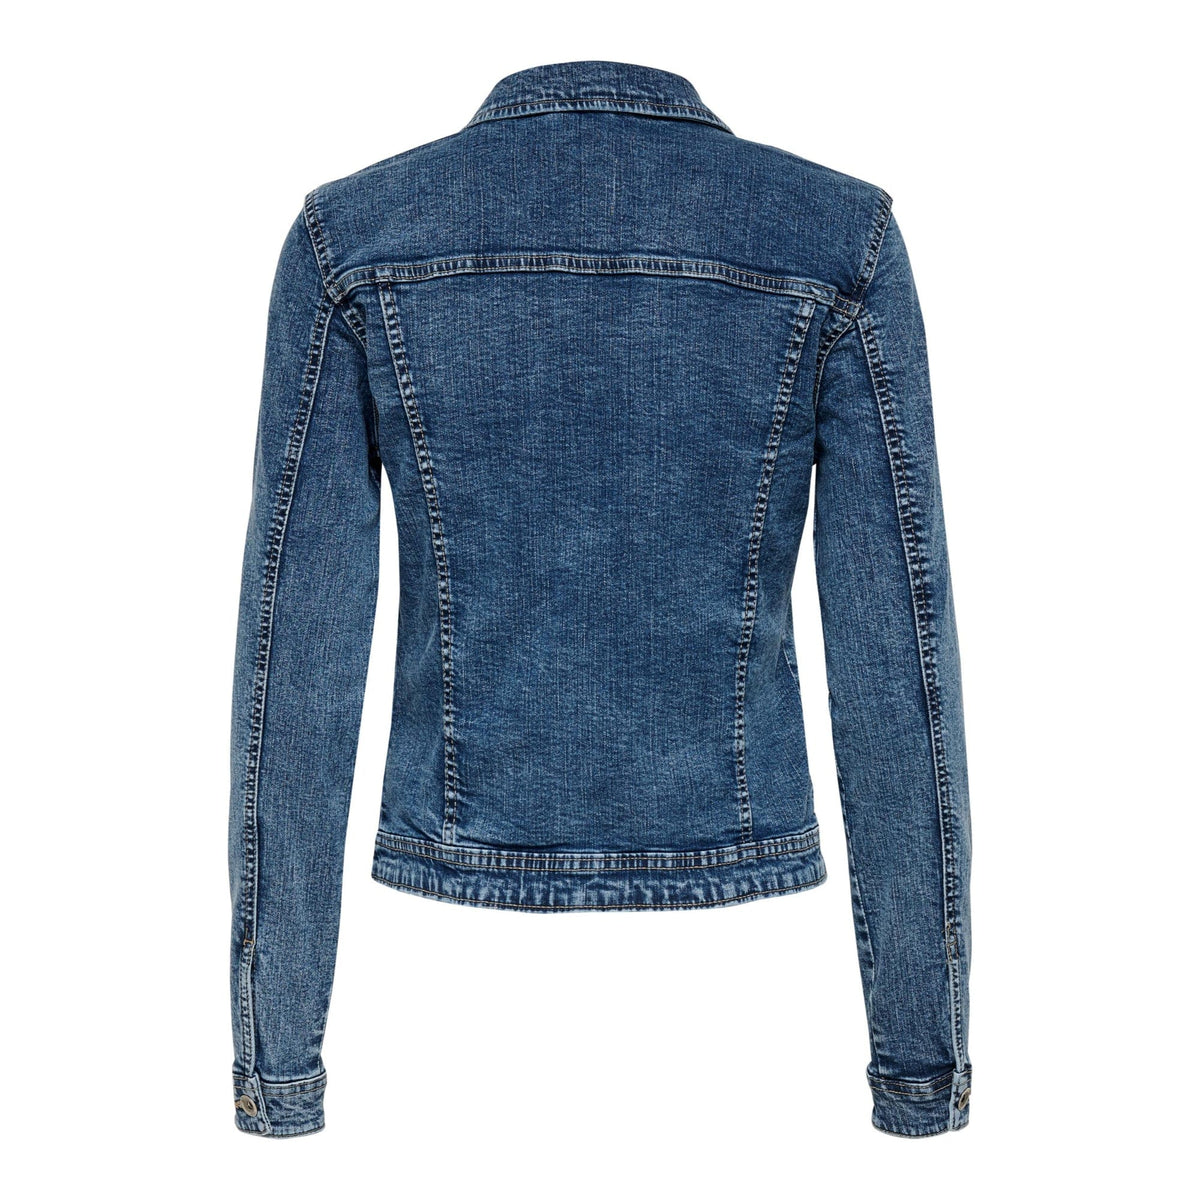 Only Outerwear Only Blue Short Denim Jacket